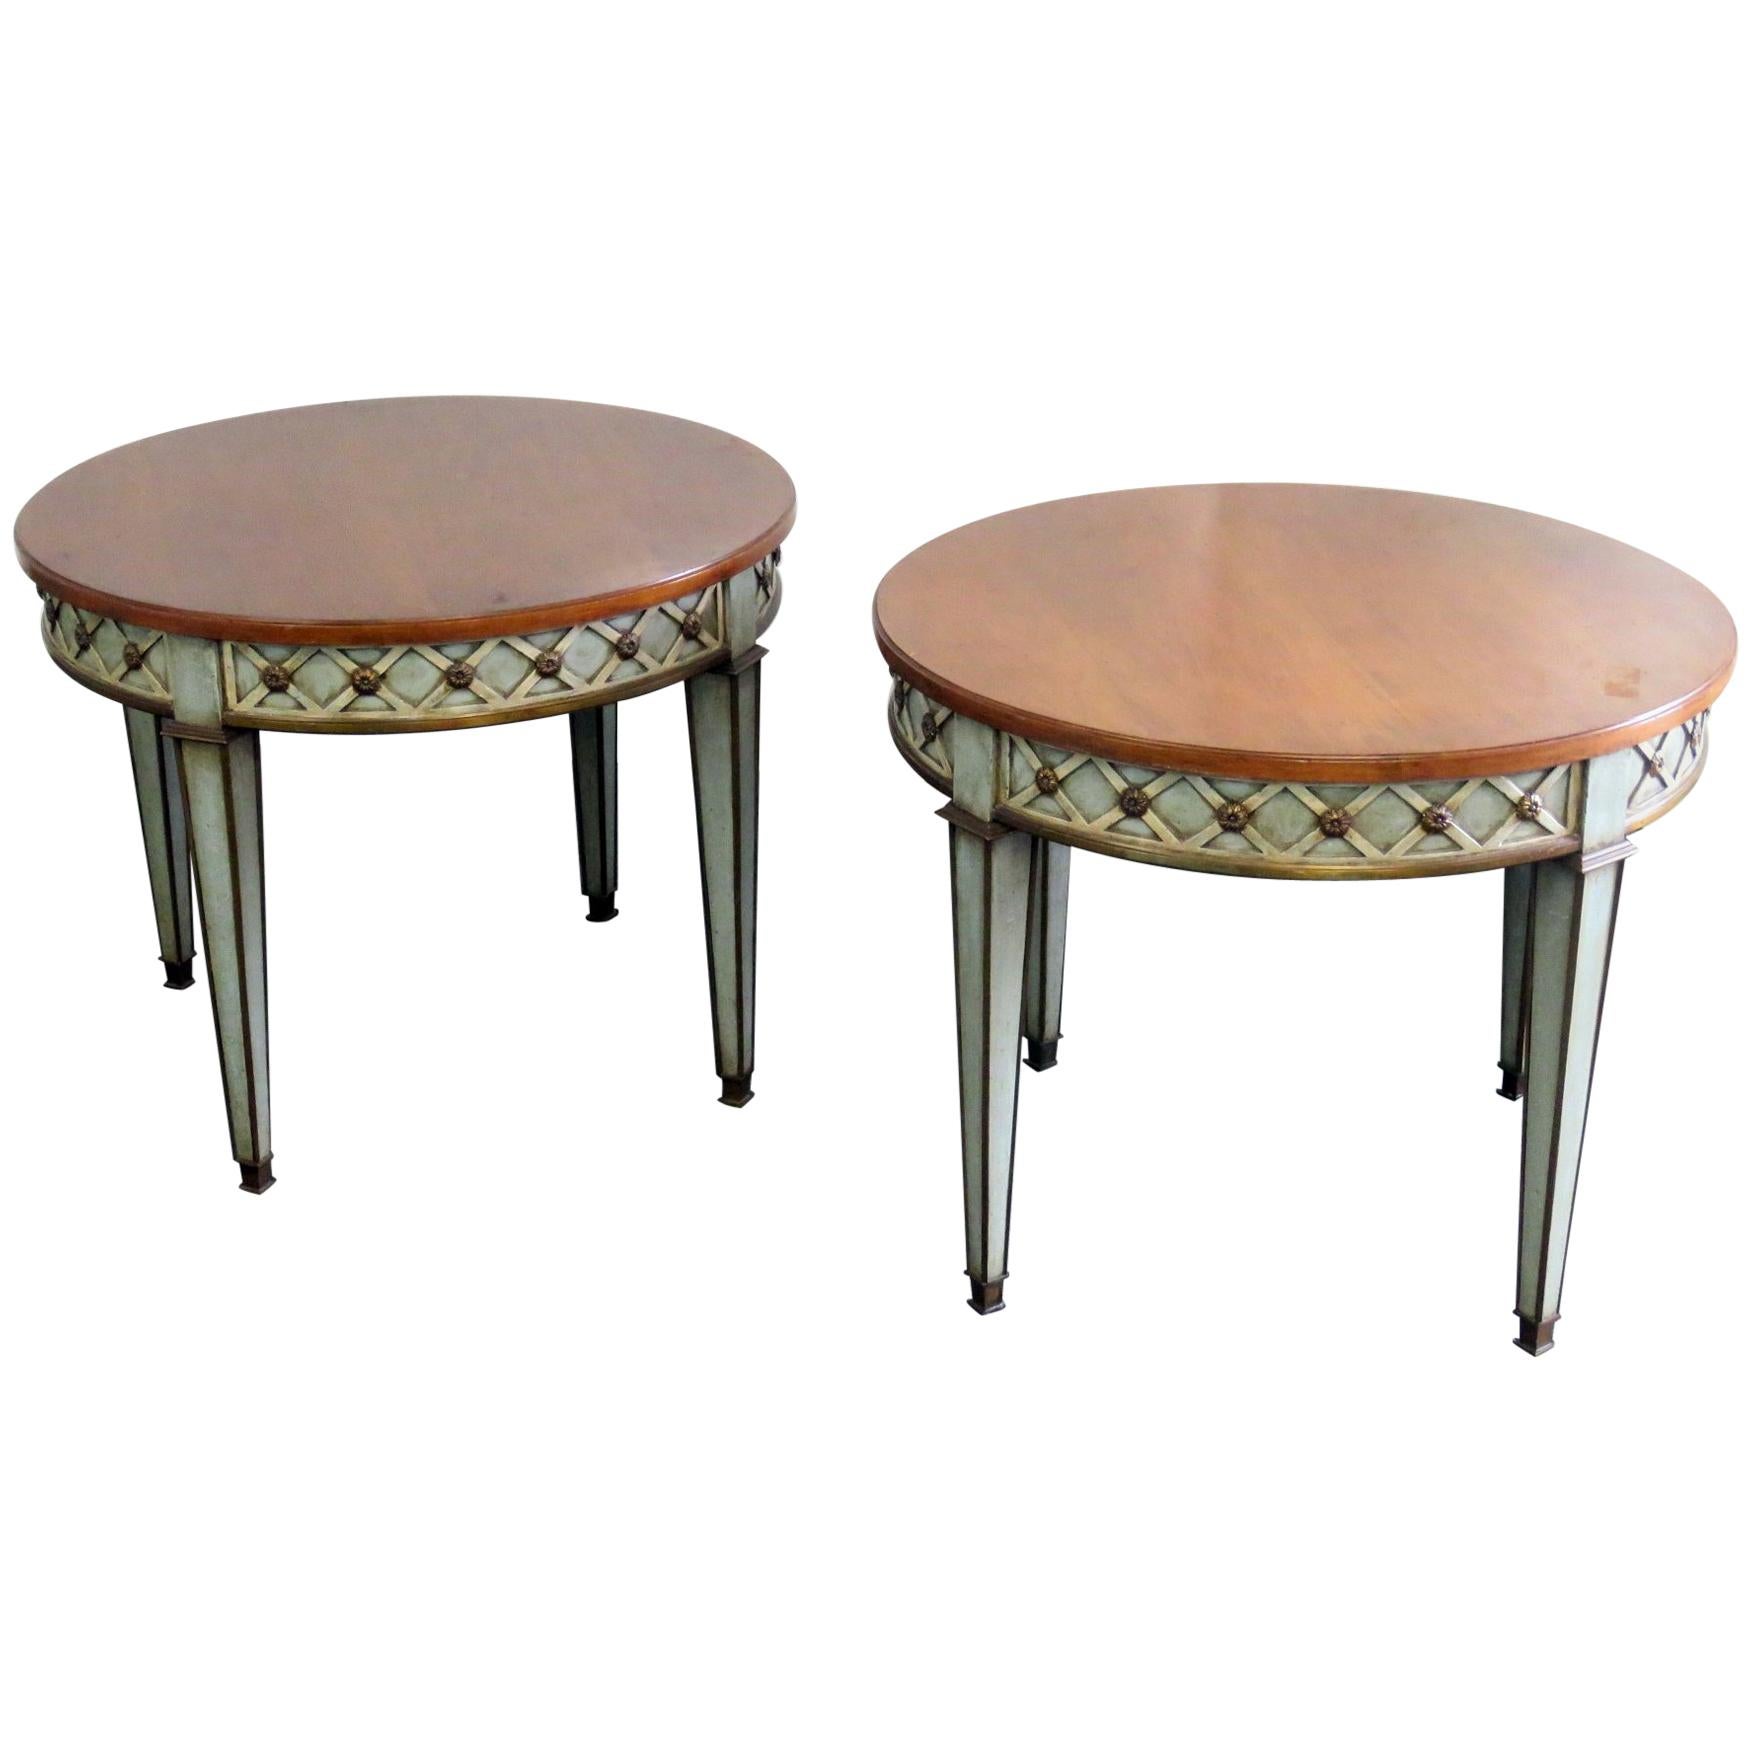 Pair of Trouvailles French Directoire Style Paint Decorated Side End Tables